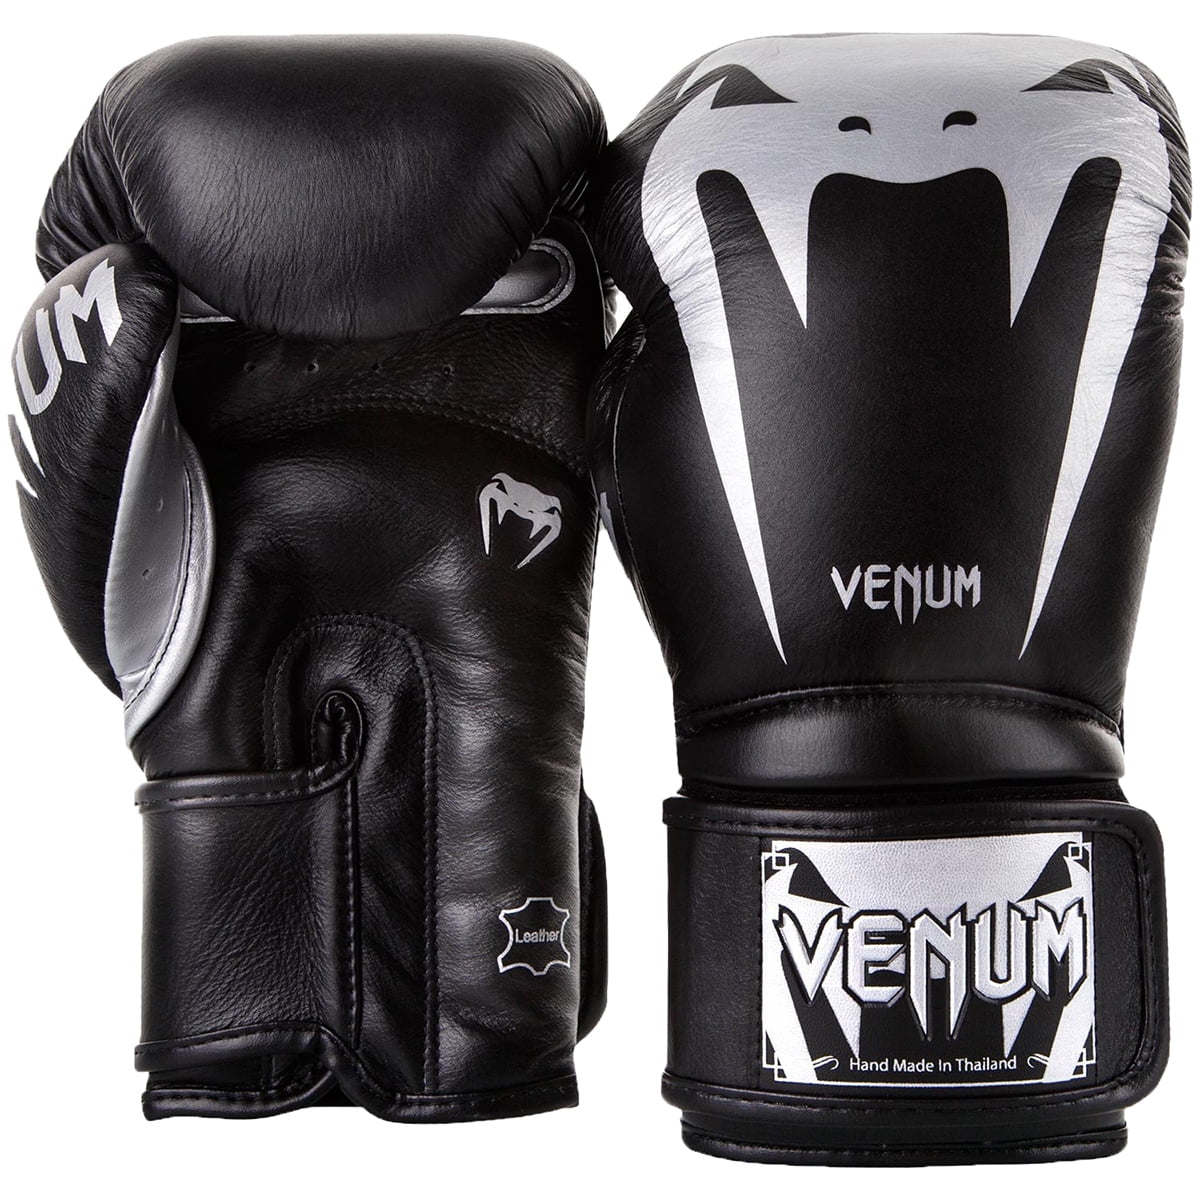 VENUM GIANT 3.0 BOXING GLOVES NAPPA LEATHER BLACK/SILVER 